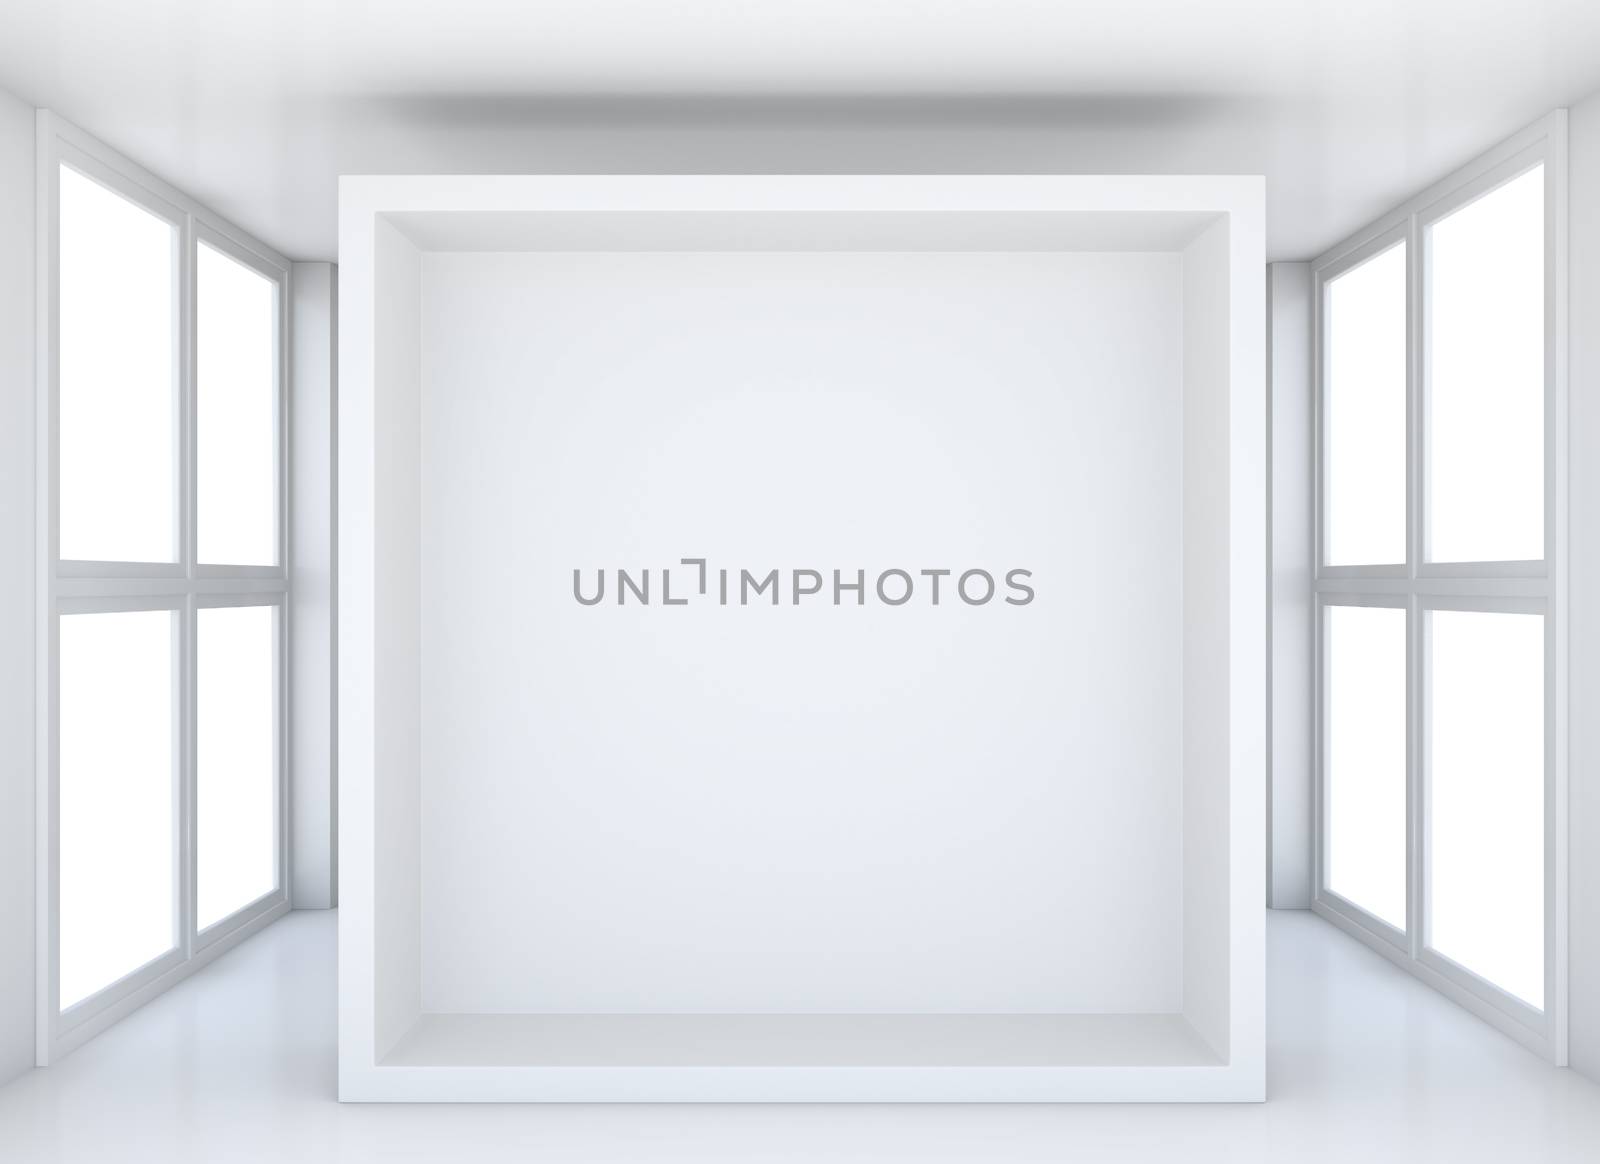 Exhibit showcase in clean blank interior room with large windows and reflection floor. White background behind window. 3D rendering